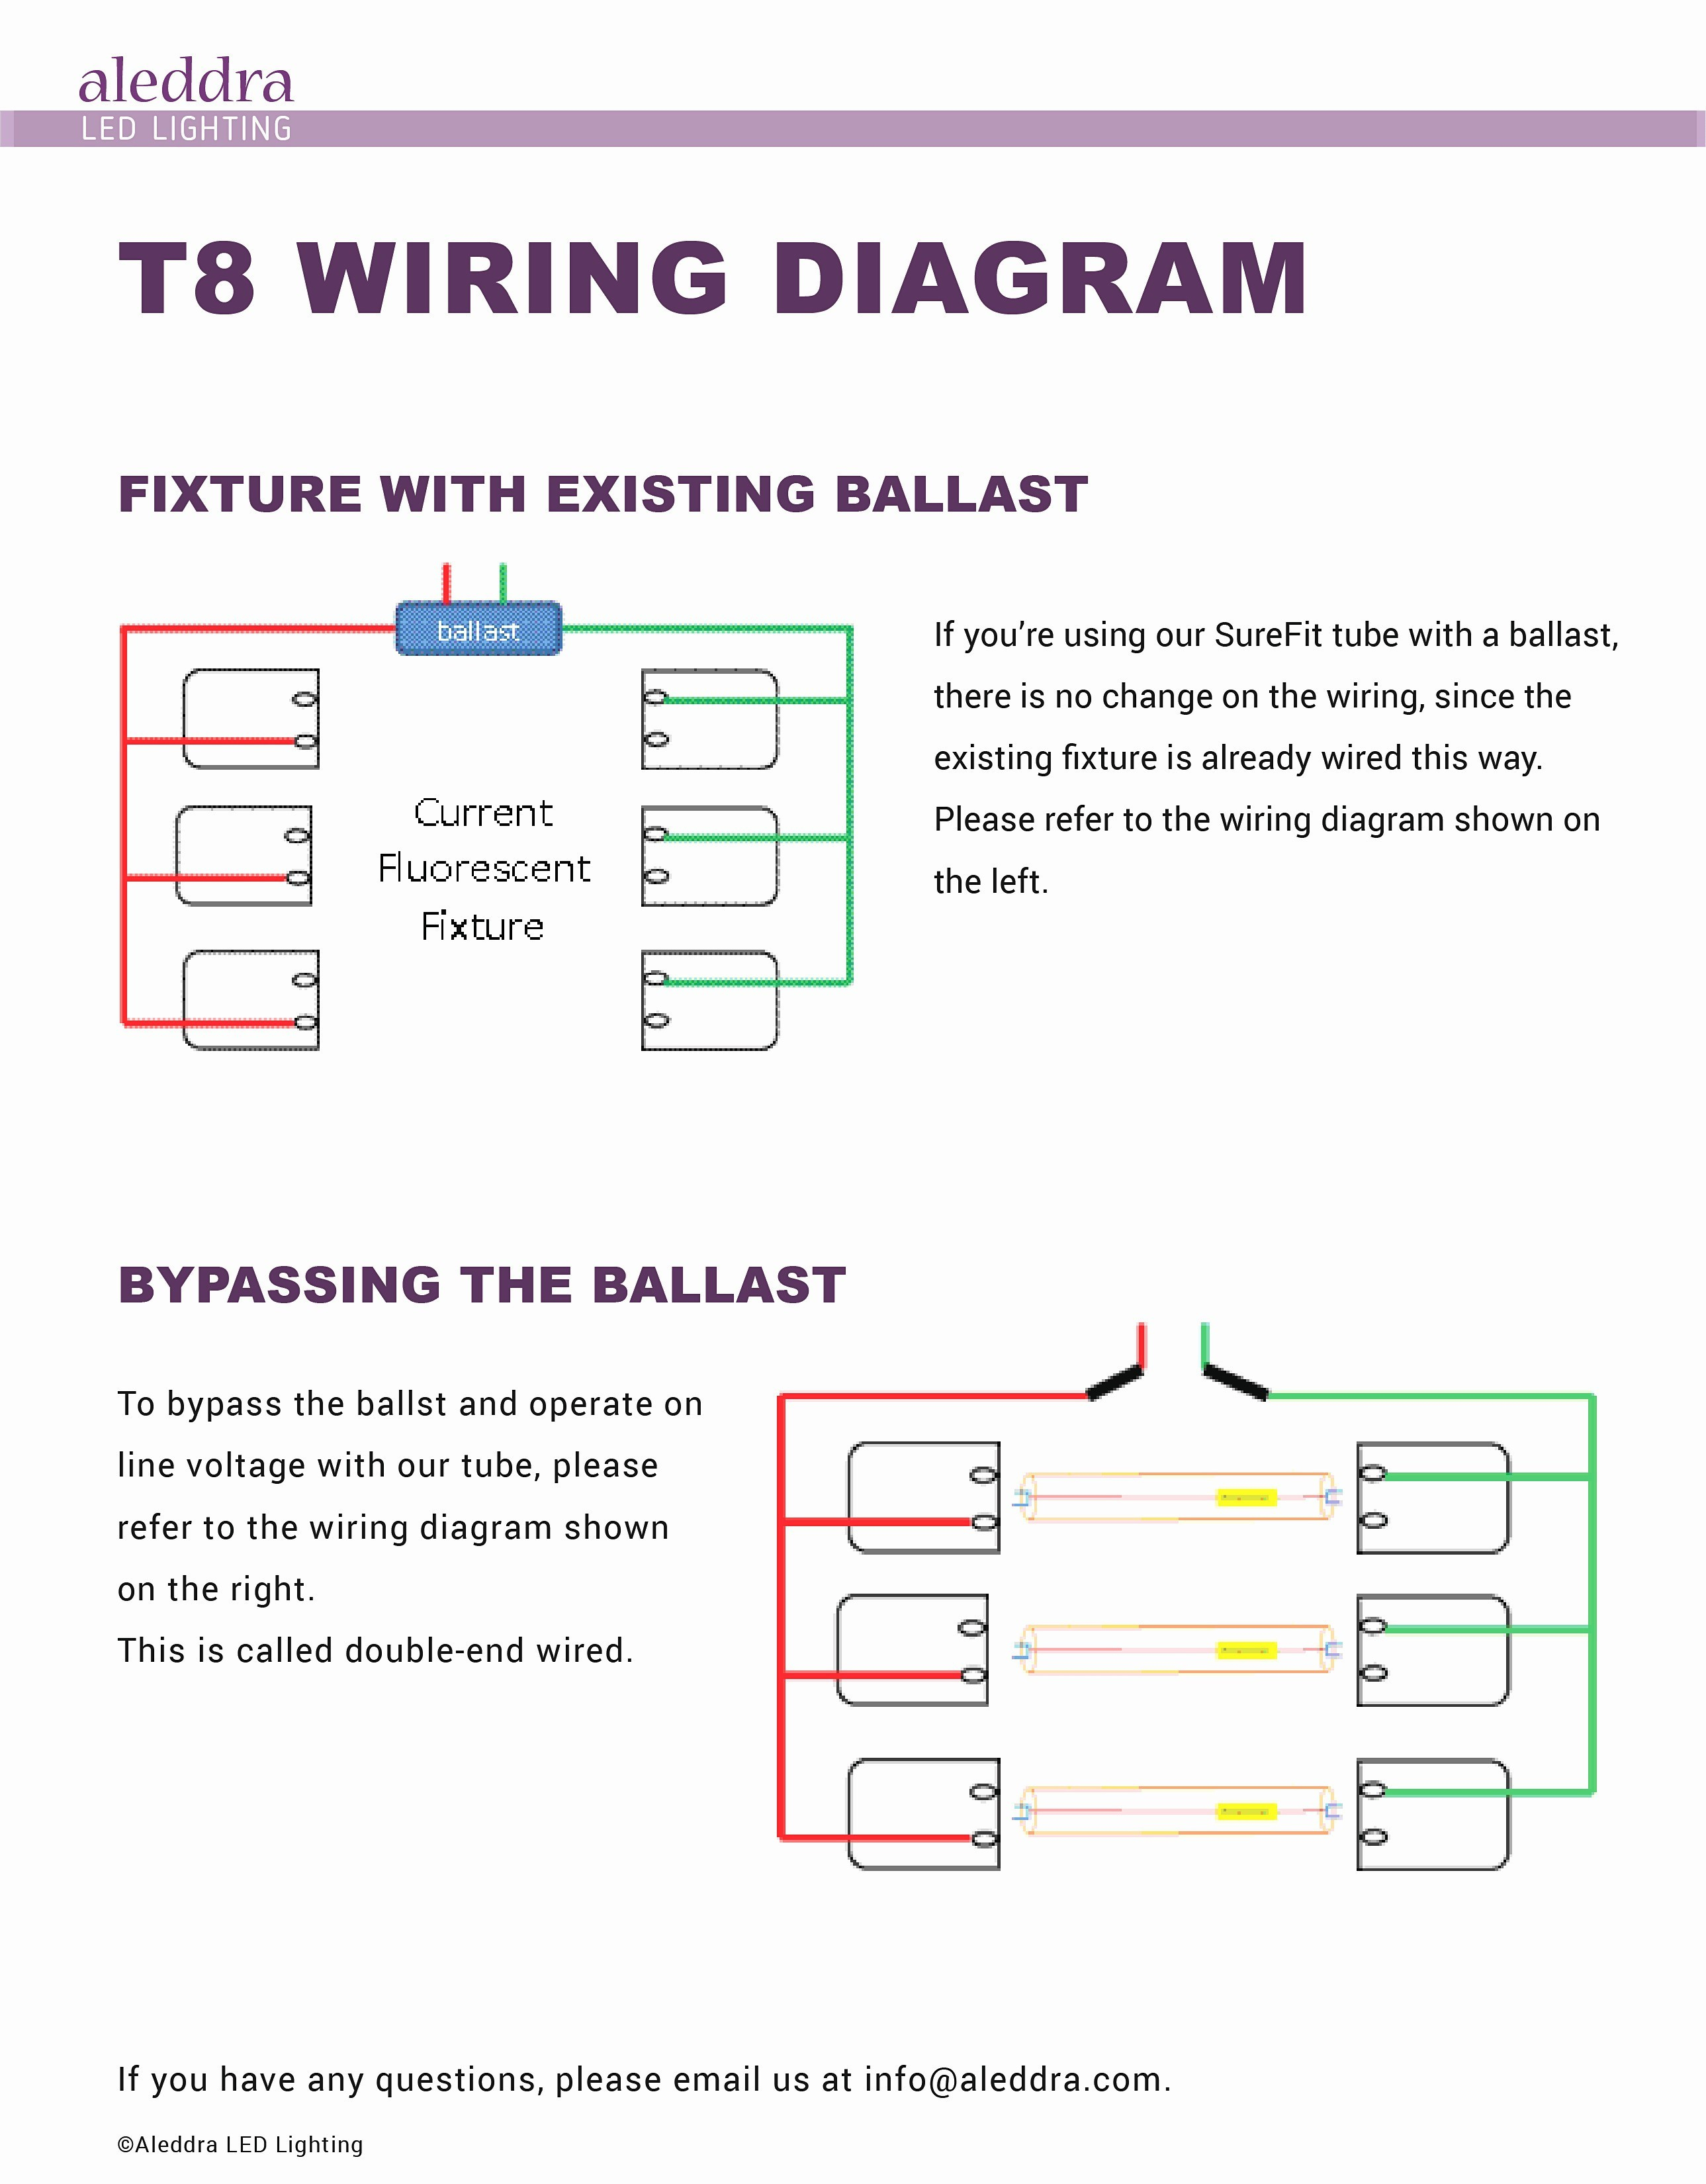 2 Lamp T8 Ballast Wiring Diagram Awesome 20 Fresh Of 4 | Wiring - 4 Lamp T8 Ballast Wiring Diagram